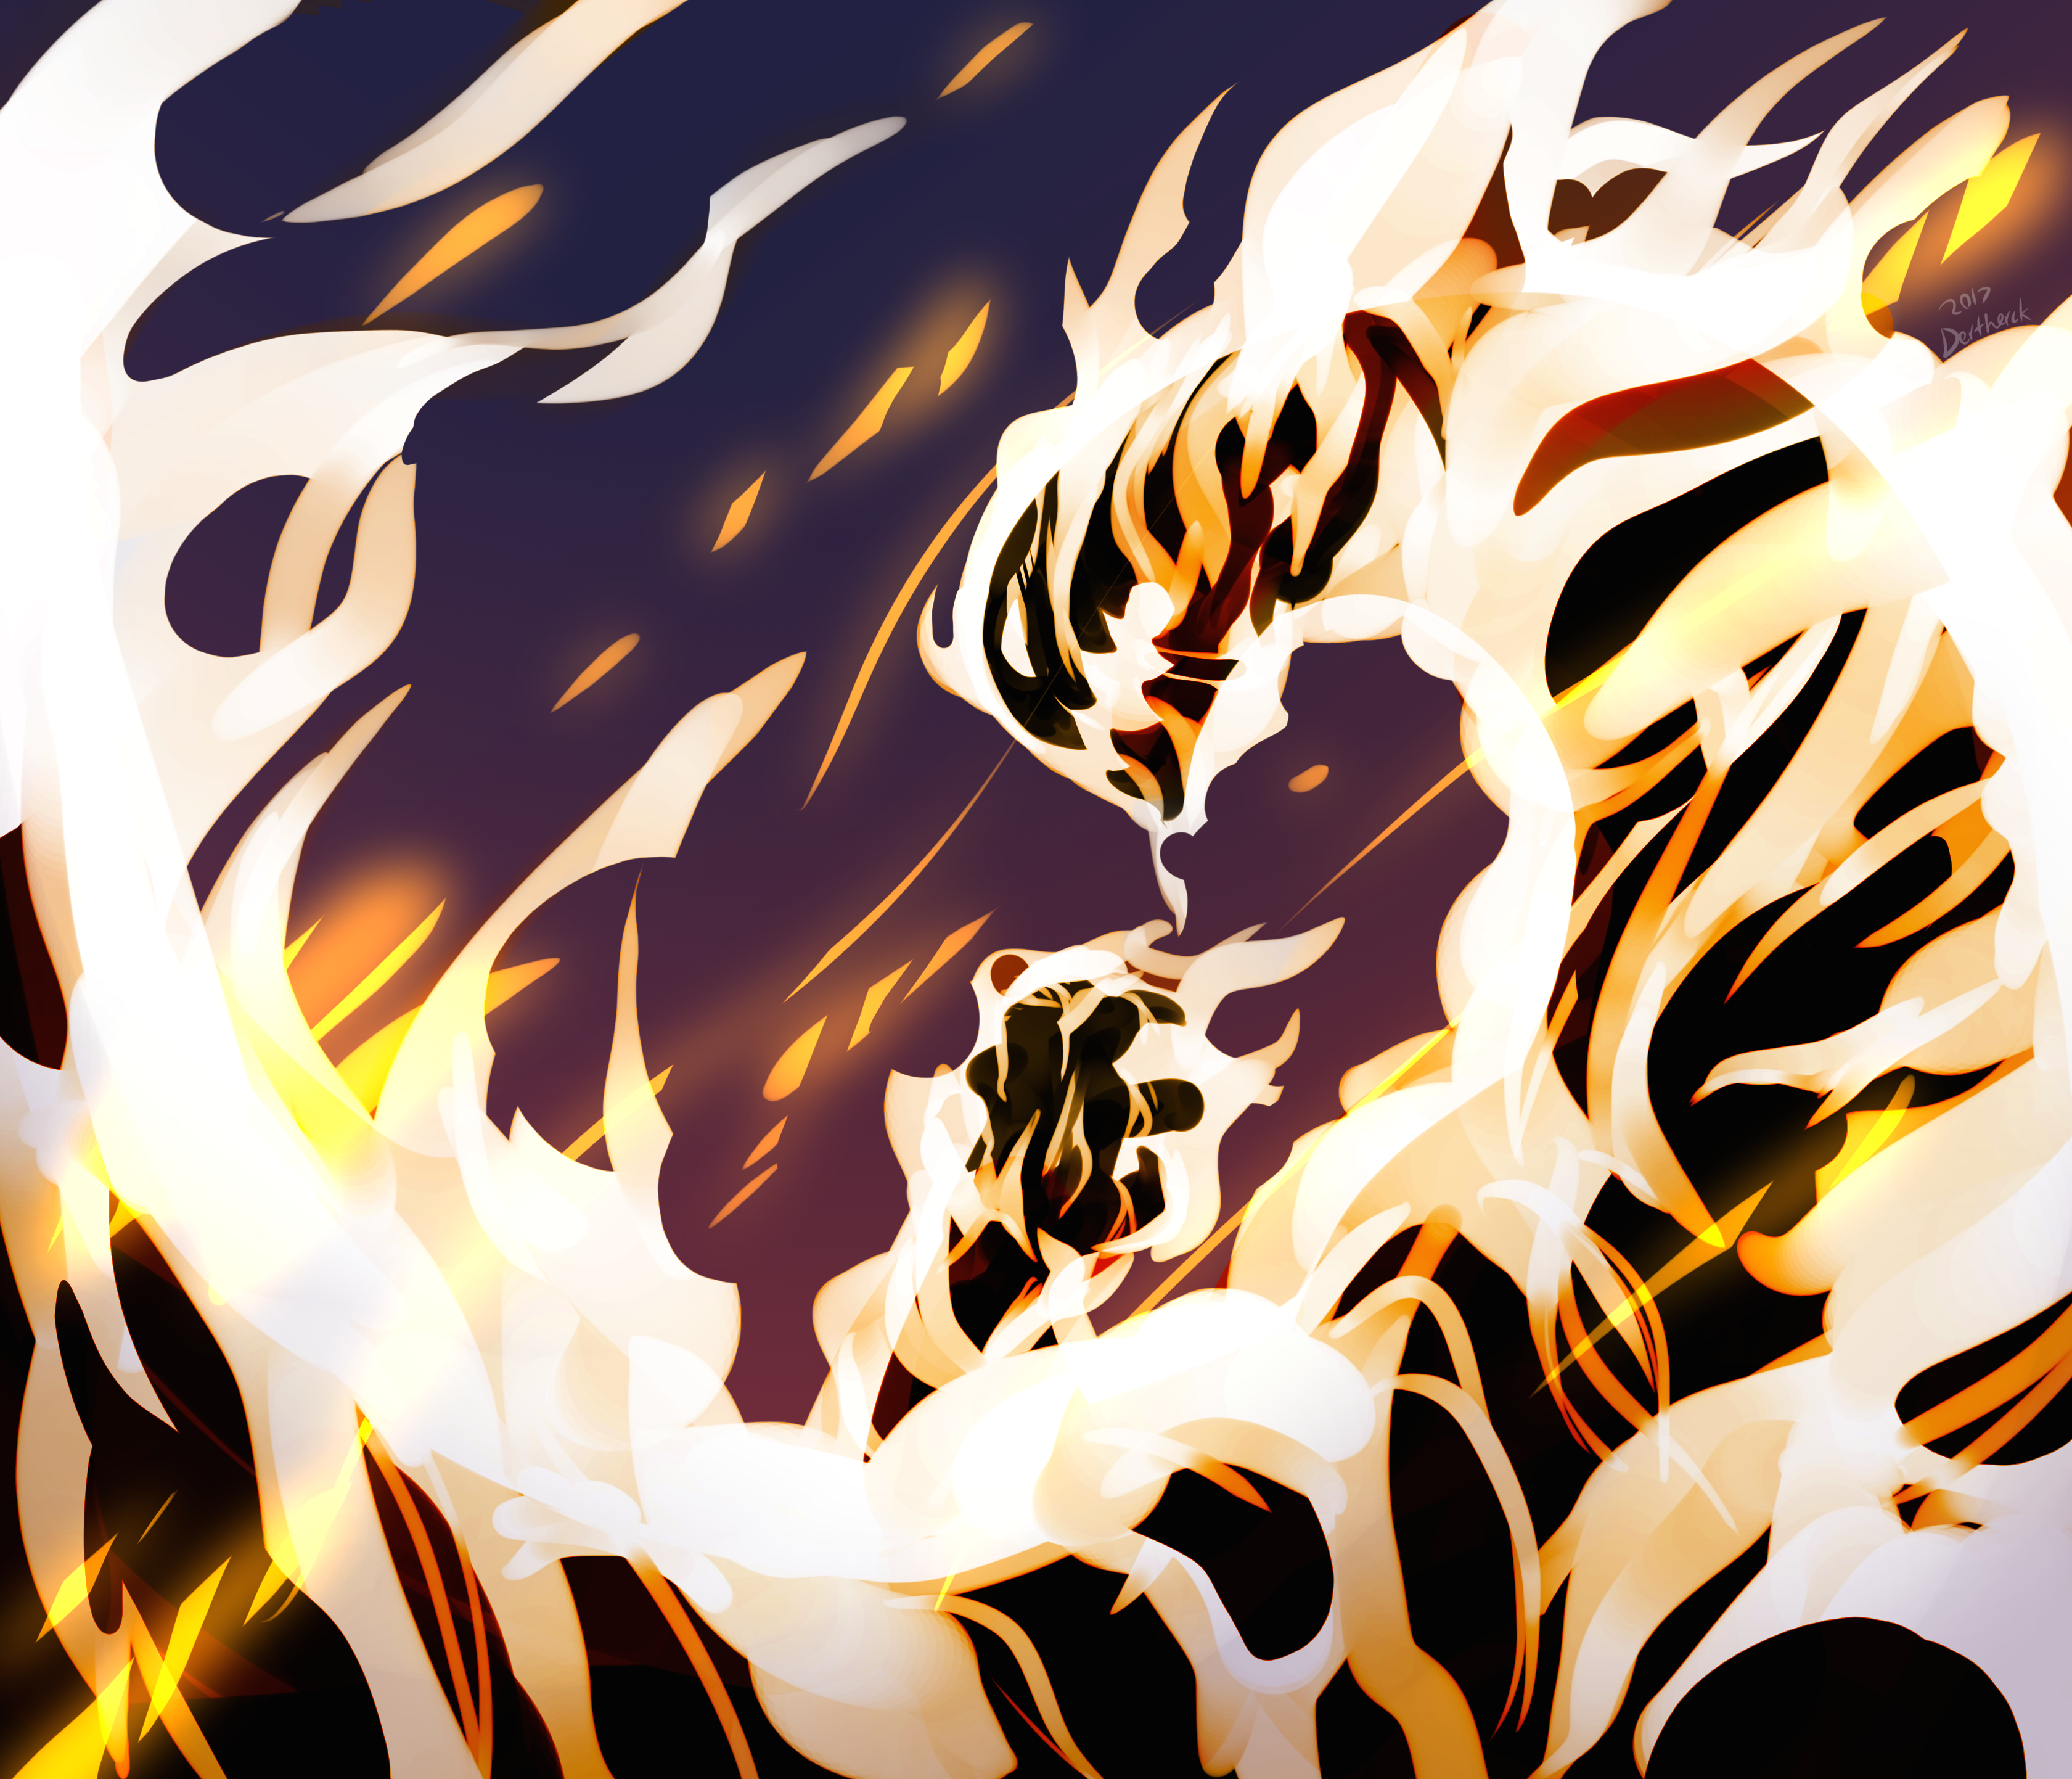 Atlas Flame, Weekyle15's Fairy Tail Fanfiction Wiki